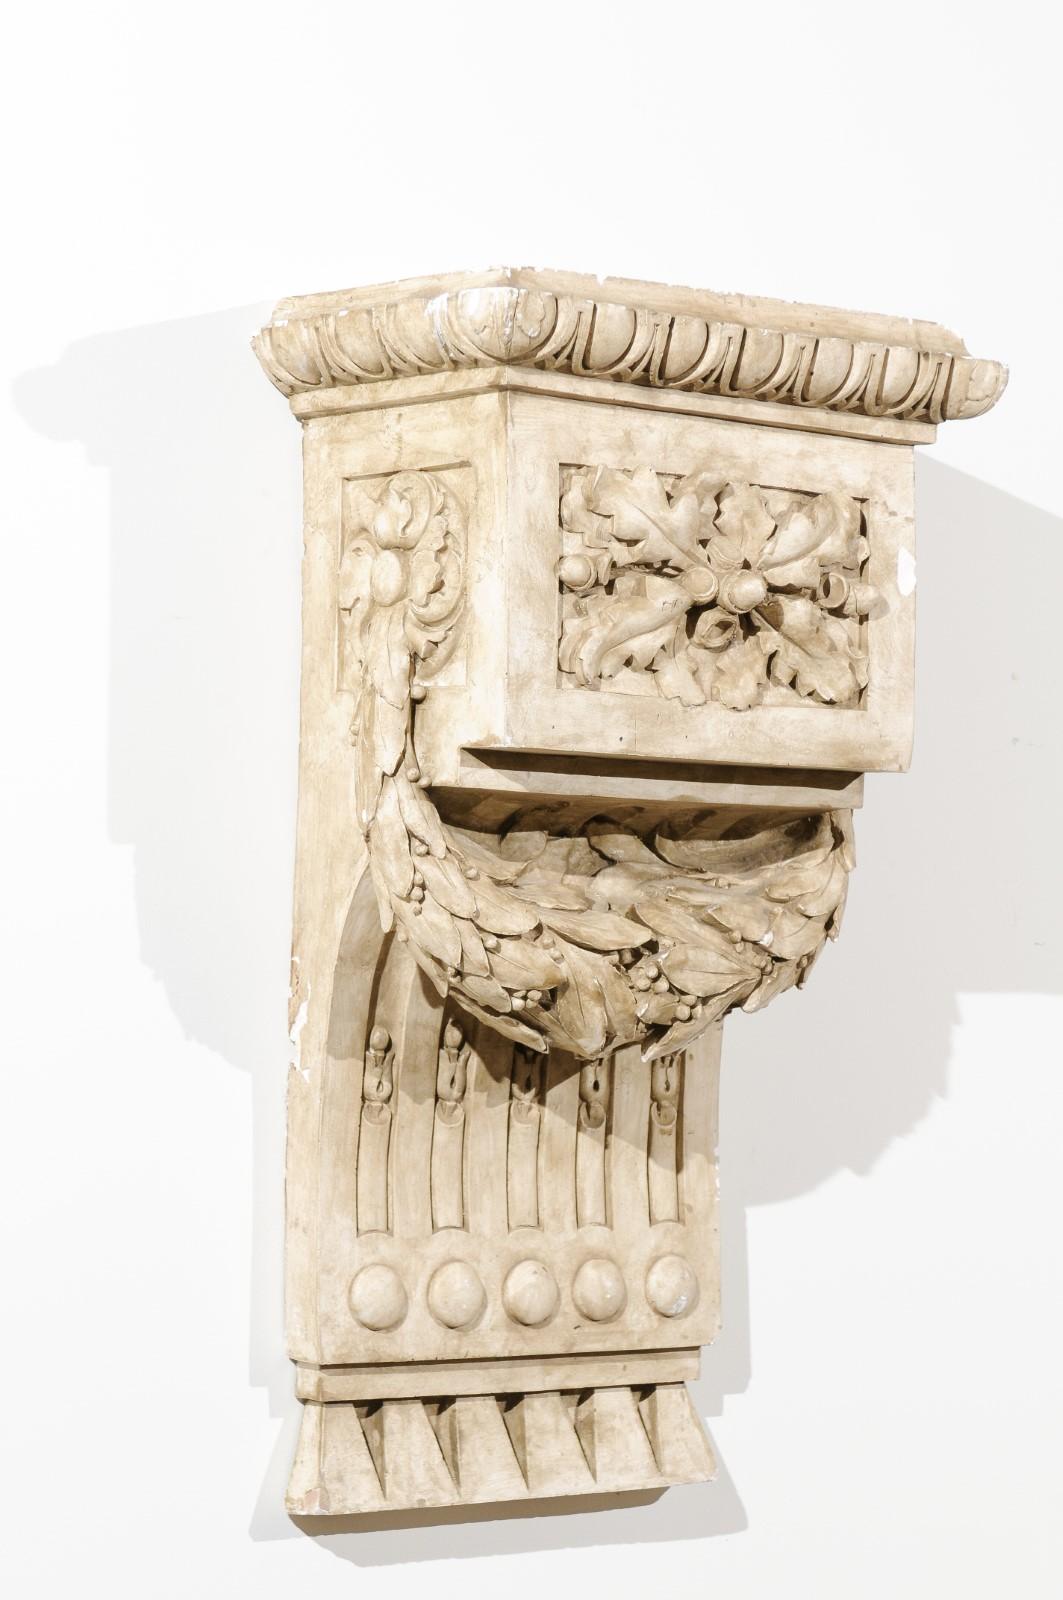 A French Louis-Philippe period stucco wall bracket decoration from the mid-19th century, with egg-and-dart and garland motifs. Born in France during the early years of king Louis-Philippe's reign, this exquisite stucco wall bracket features an egg